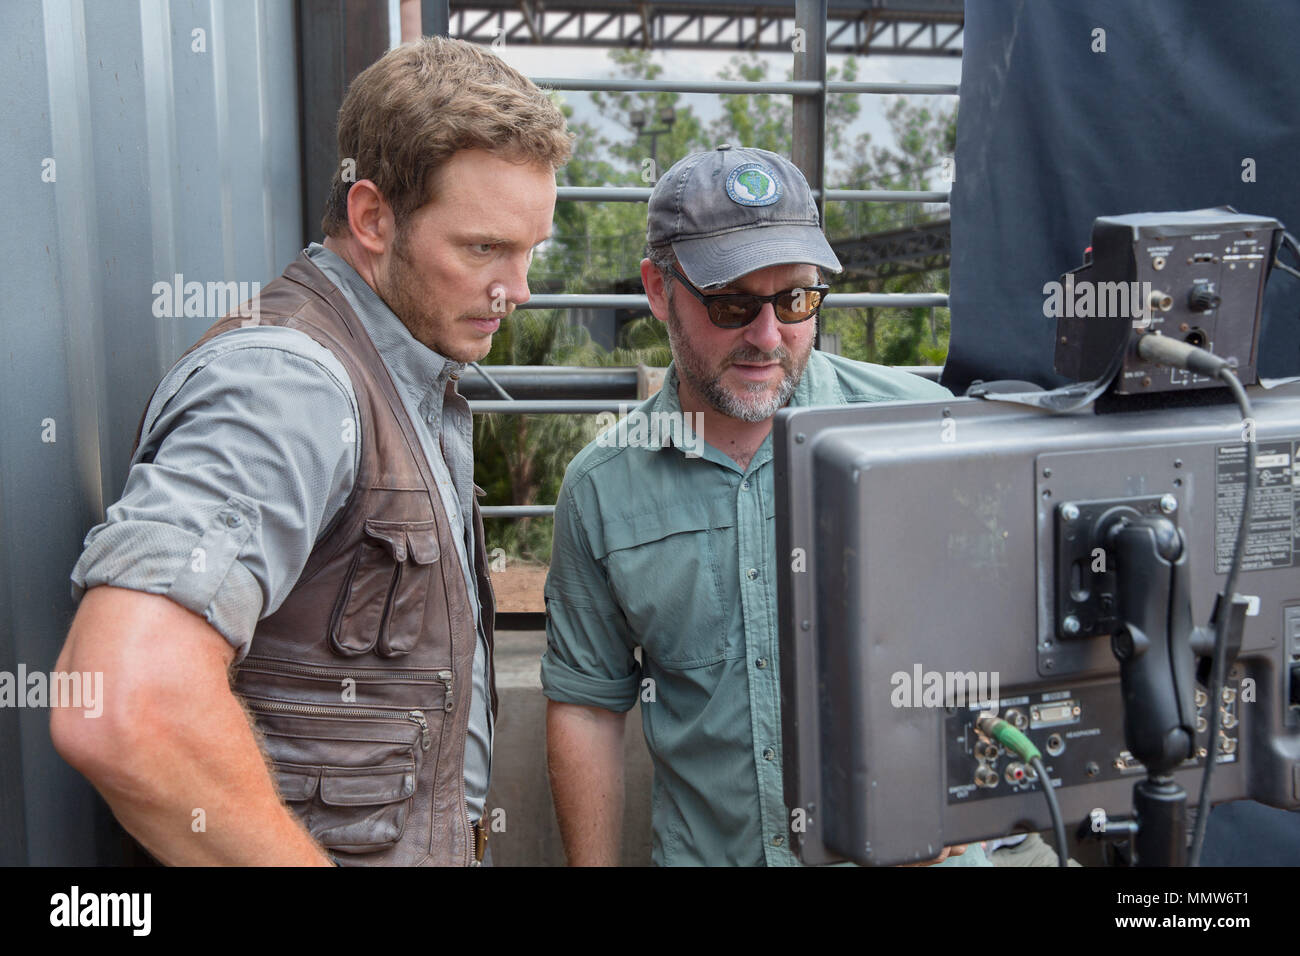 RELEASE DATE: June 12, 2015 TITLE: Jurassic World STUDIO: Universal Pictures DIRECTOR: Colin Trevorrow PLOT: A new theme park, built on the original site of Jurassic Park, creates a genetically modified hybrid dinosaur, which escapes containment and goes on a killing spree. STARRING: CHRIS PRATT. (Credit Image: © Universal Pictures/Entertainment Pictures) Stock Photo